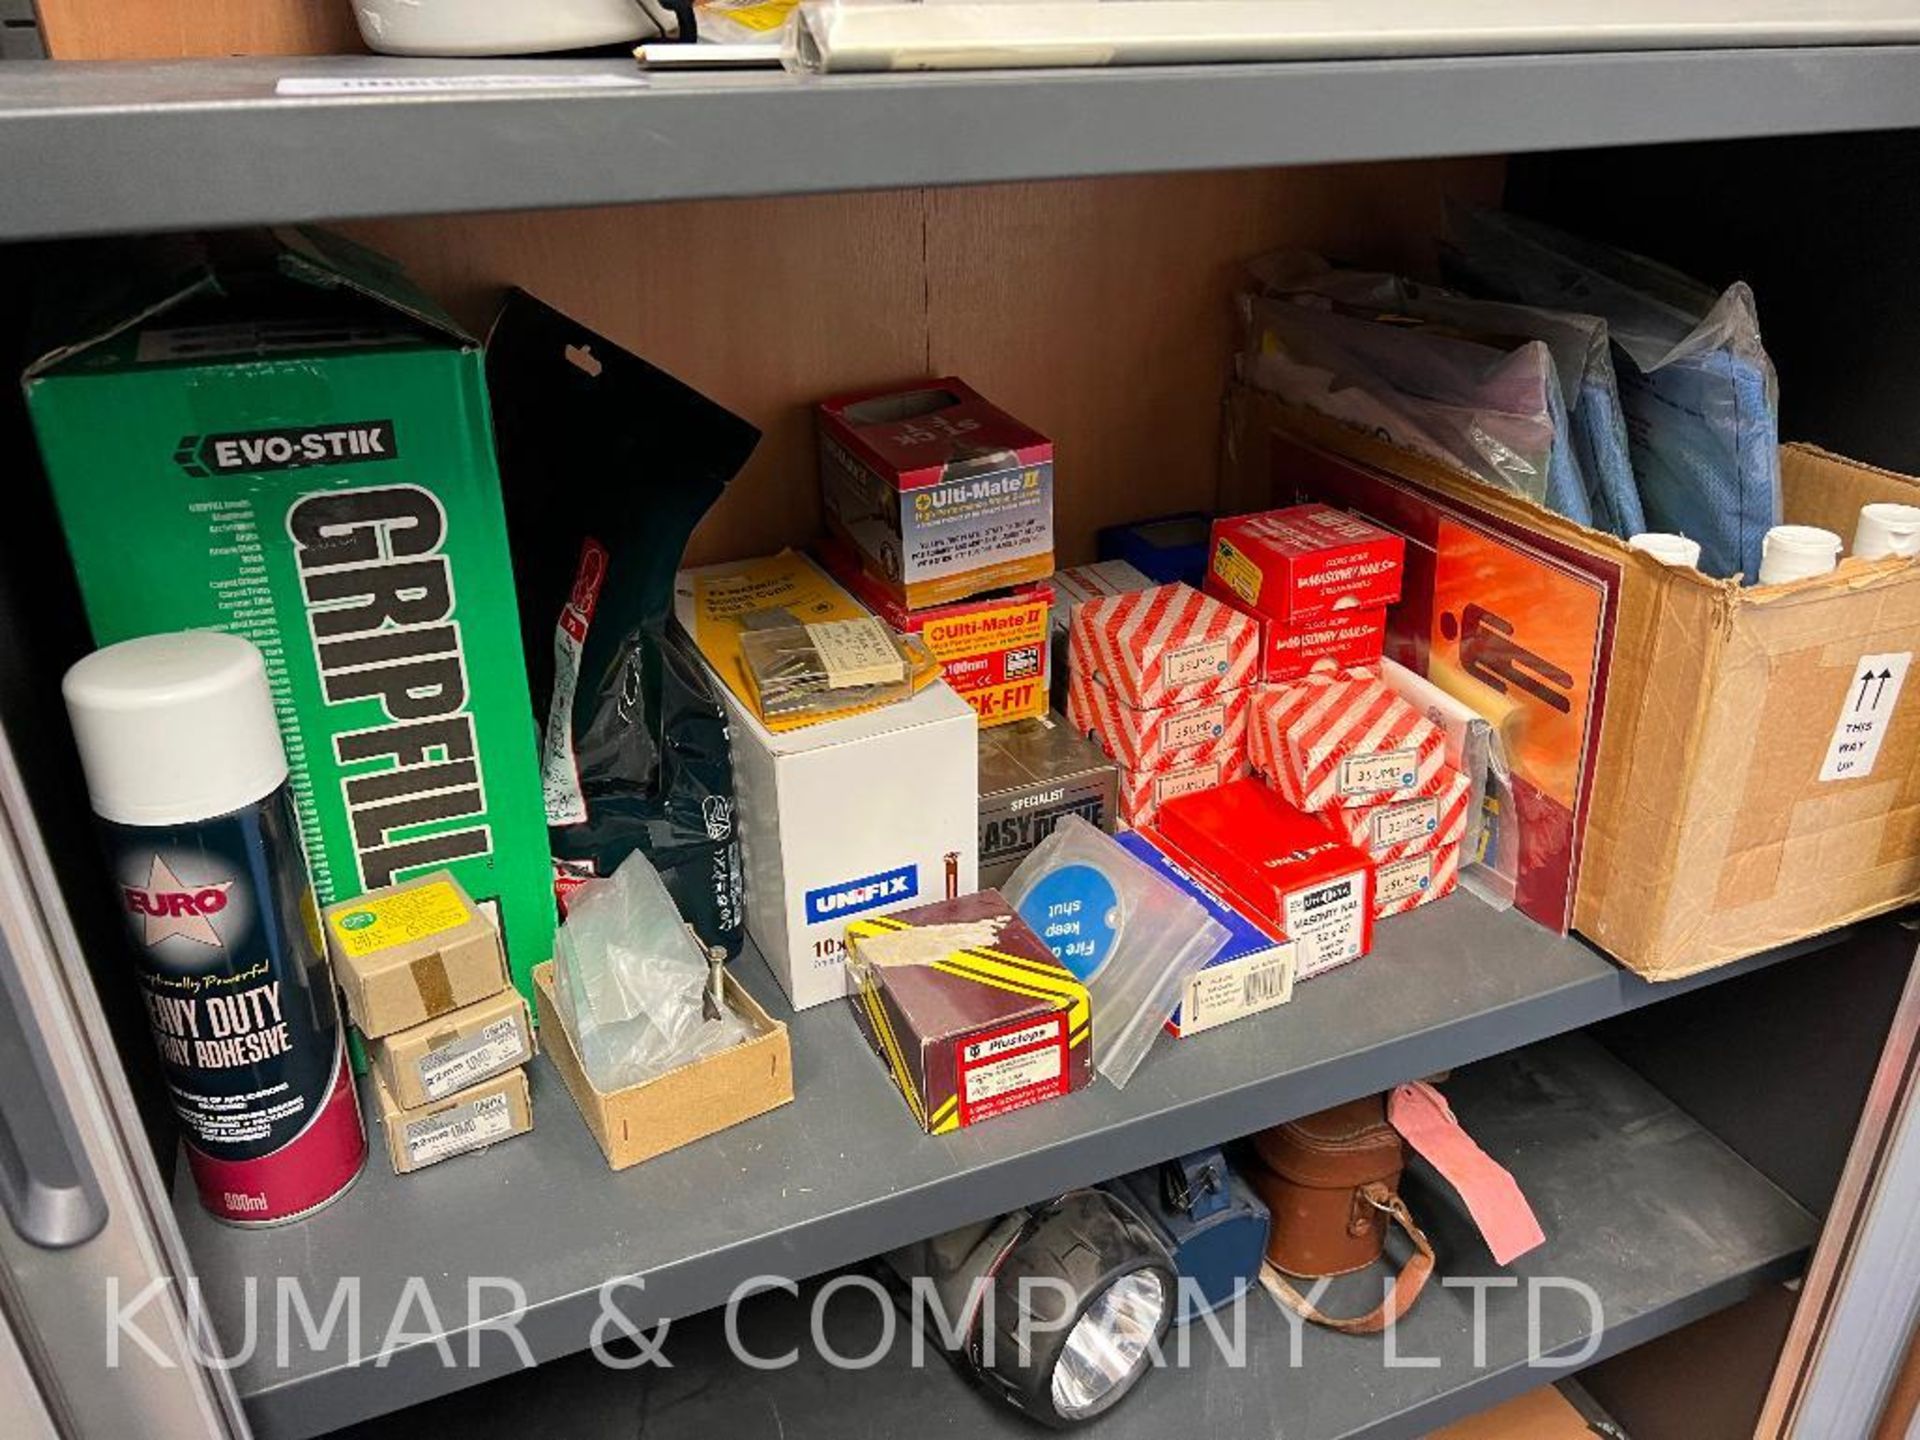 Contents of Cabinet as Shown including Adjustable Vents, Evostik Gripfill, Various Screws and Anils - Image 8 of 12